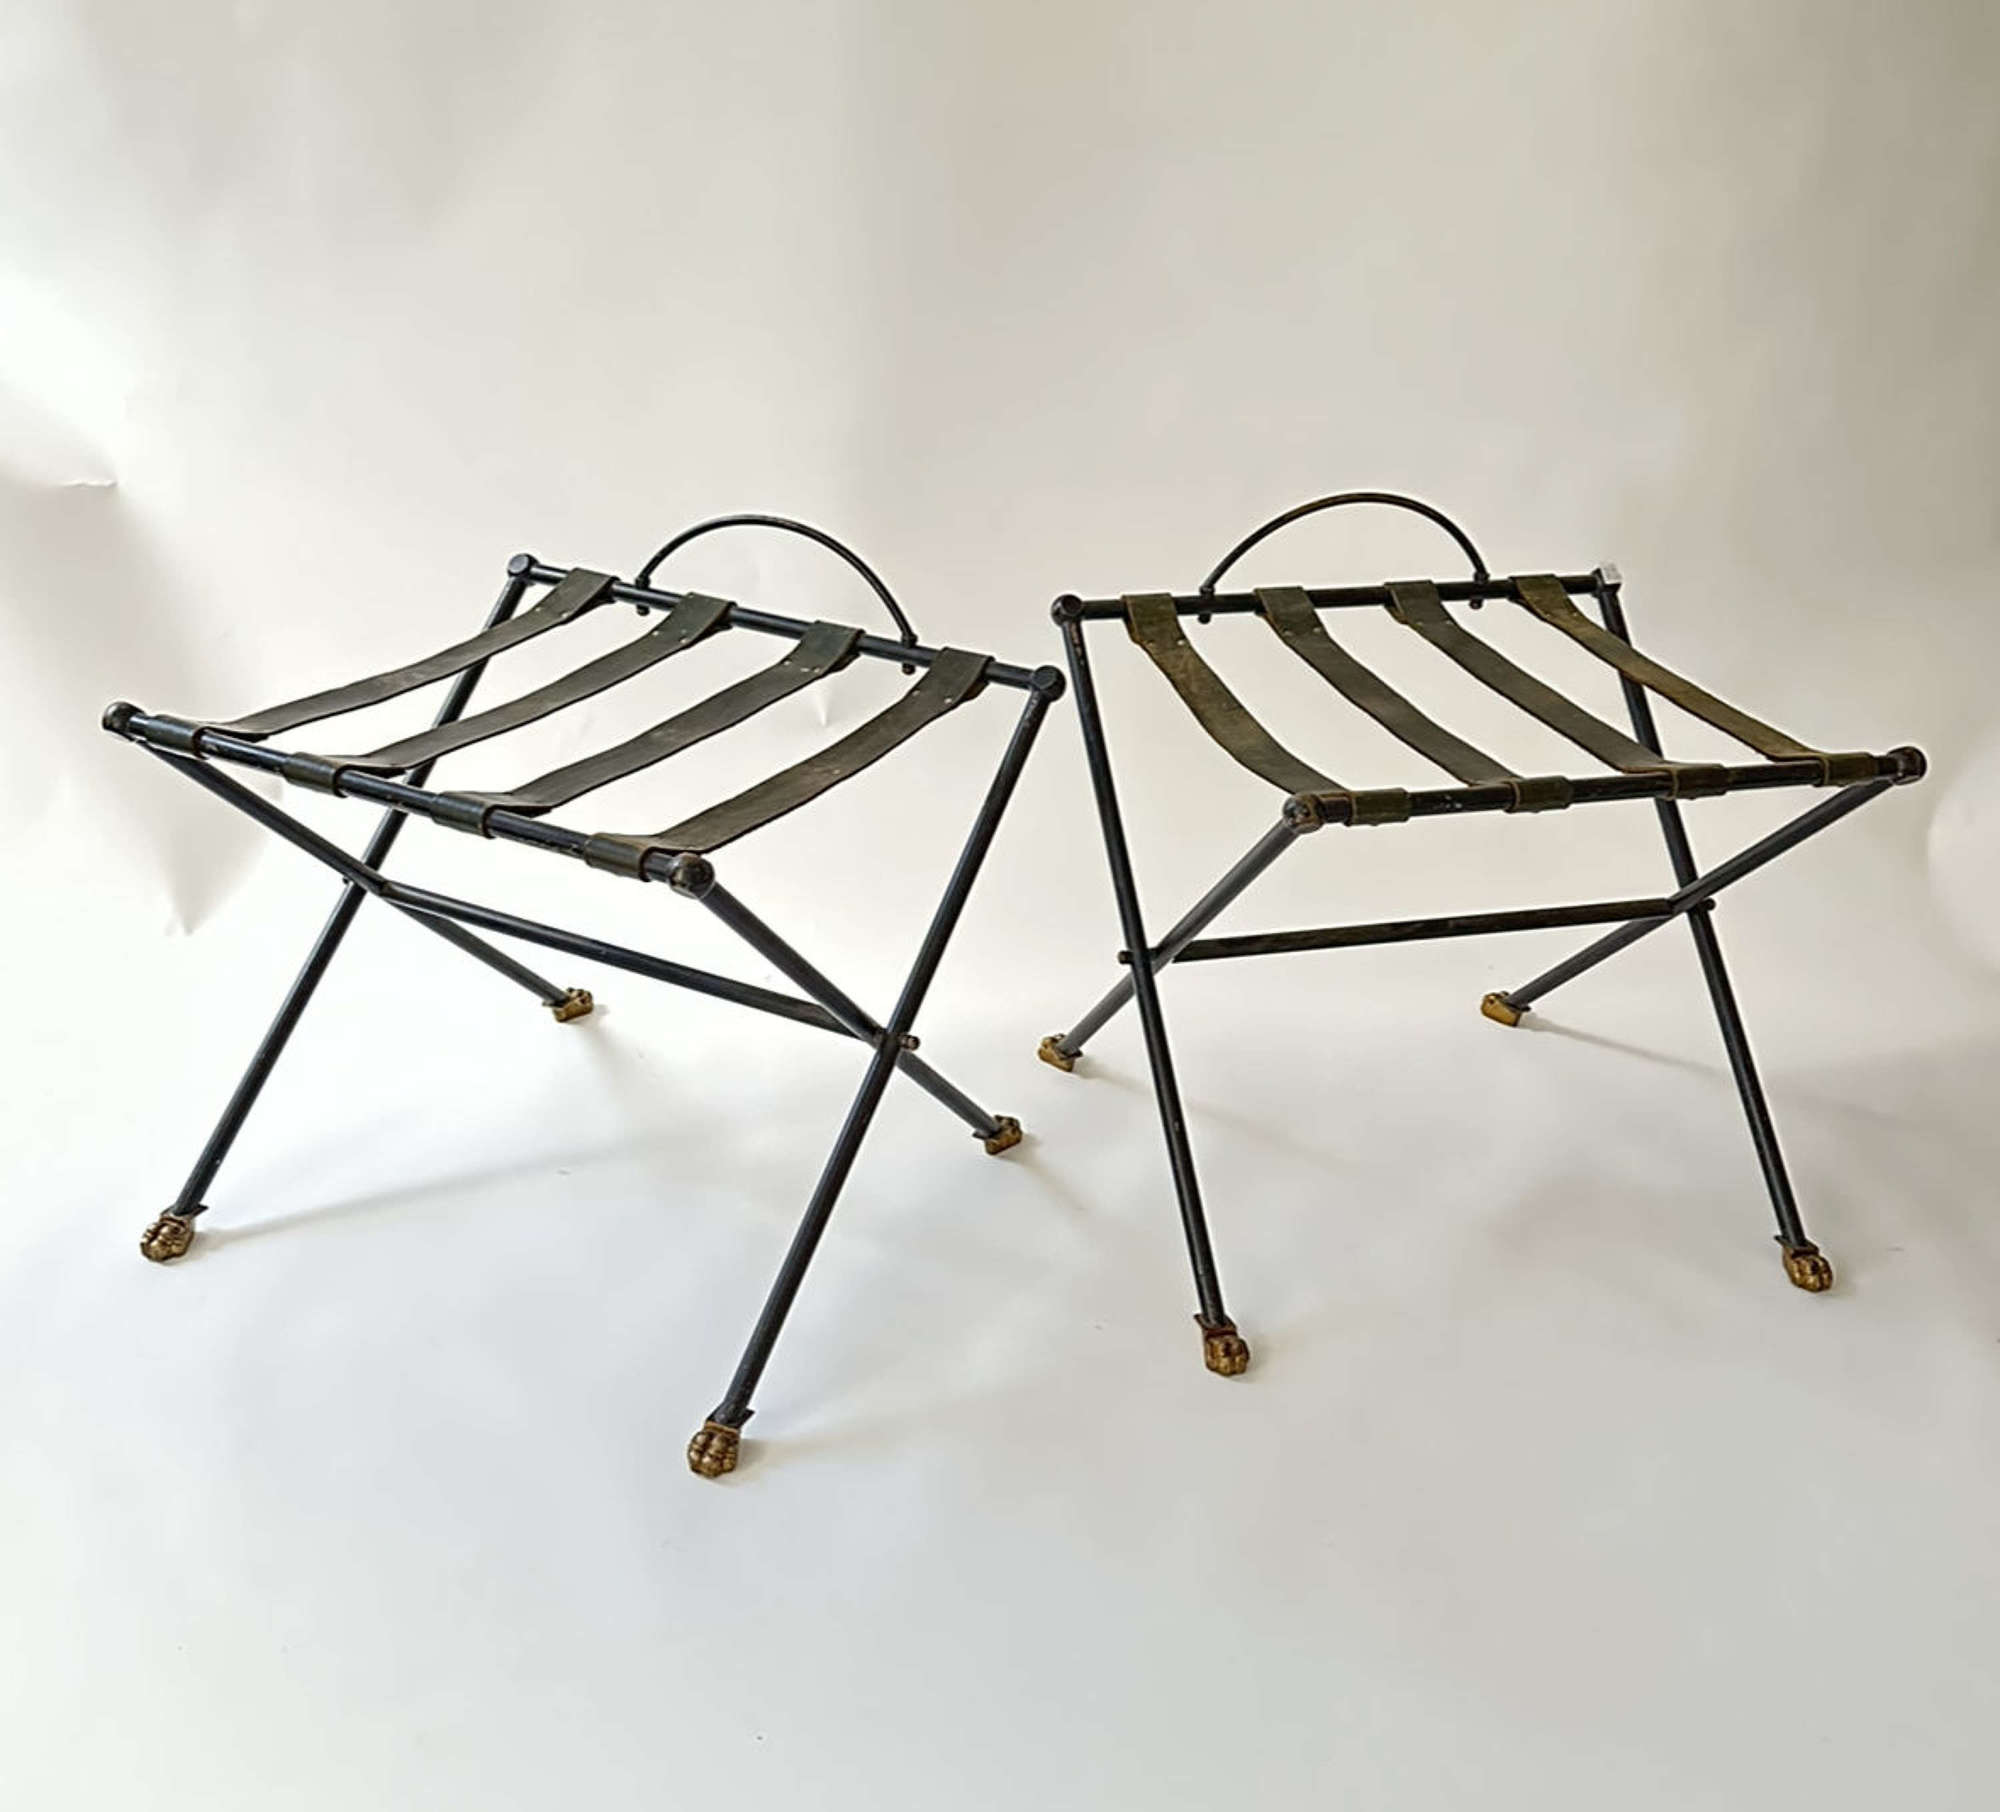 Pair of Iron and leather Luggage Racks - Italy 50s